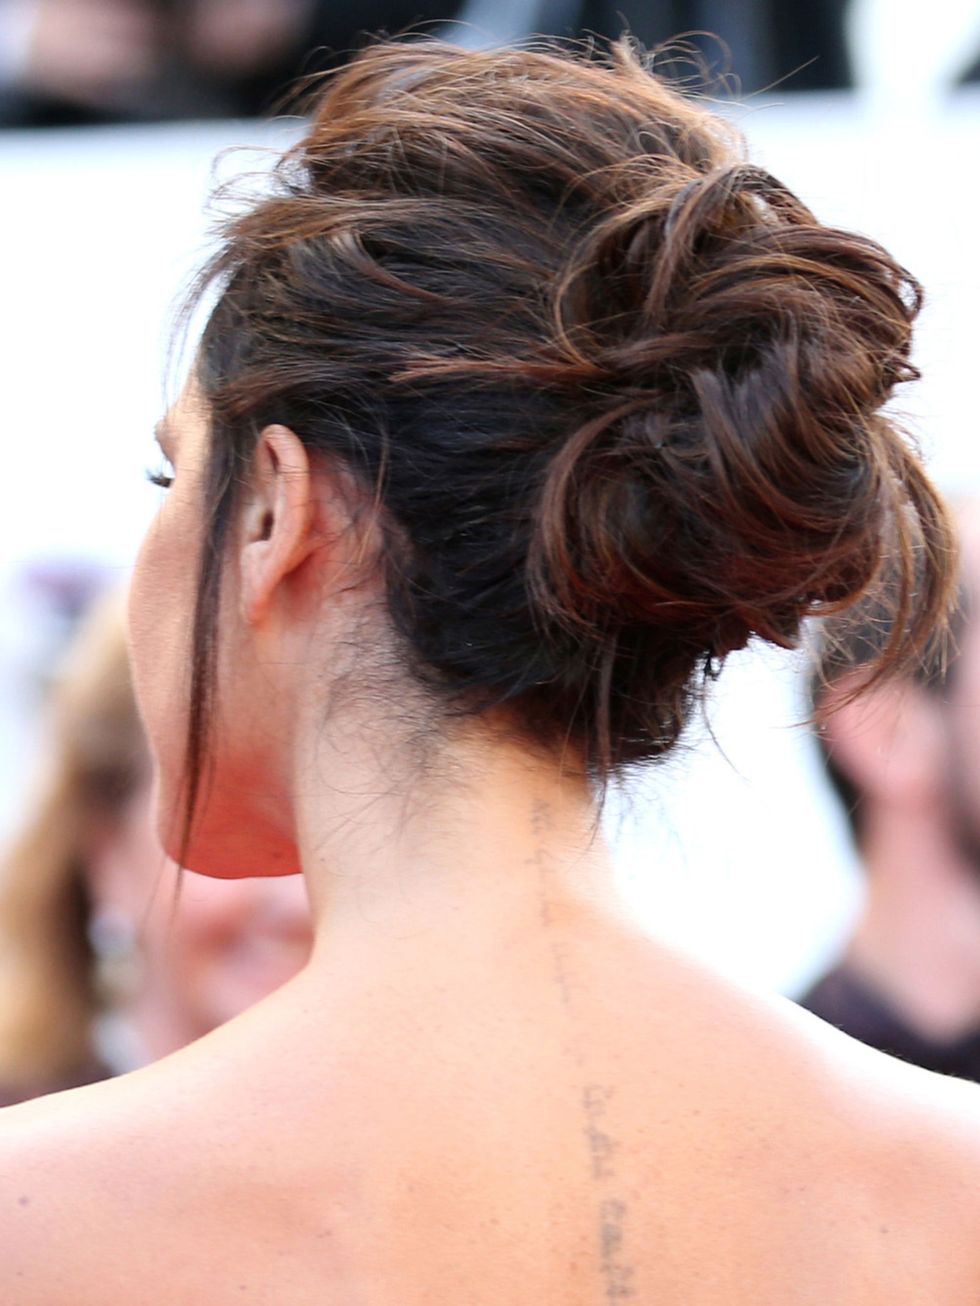 Ear, Hairstyle, Shoulder, Style, Back, Brown hair, Neck, Beauty, Long hair, Hair coloring, 